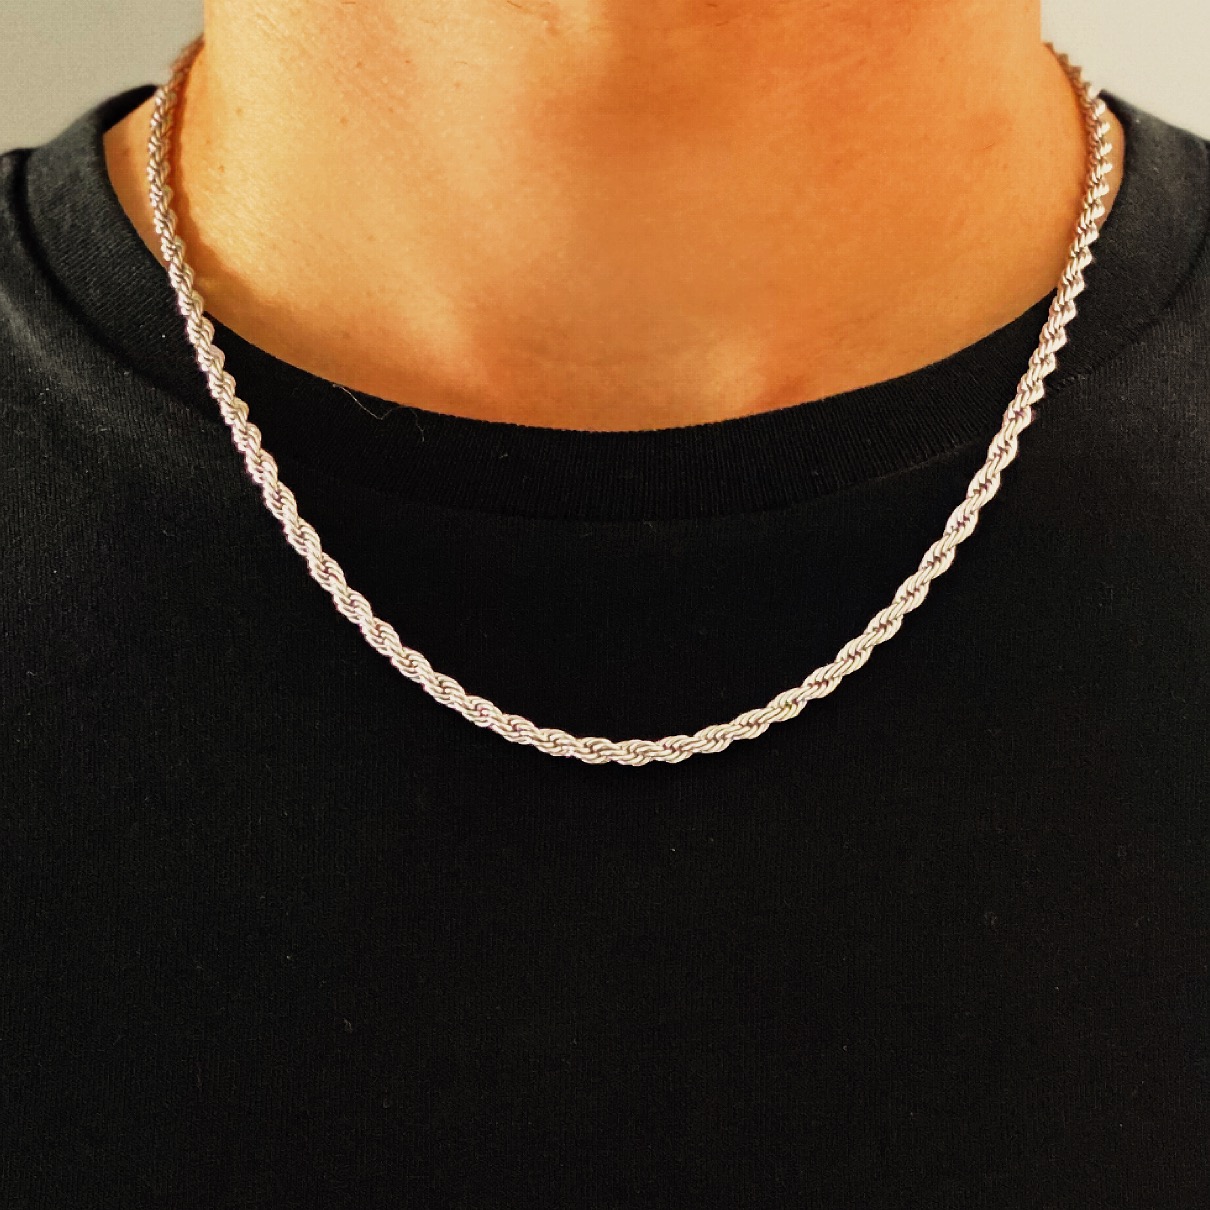 Mens Silver Rope Chain Necklace | 18 Inches | 4mm Width | unisex | Boys Necklace (Length: 18 inches) | Mens Jewelry Gift Idea